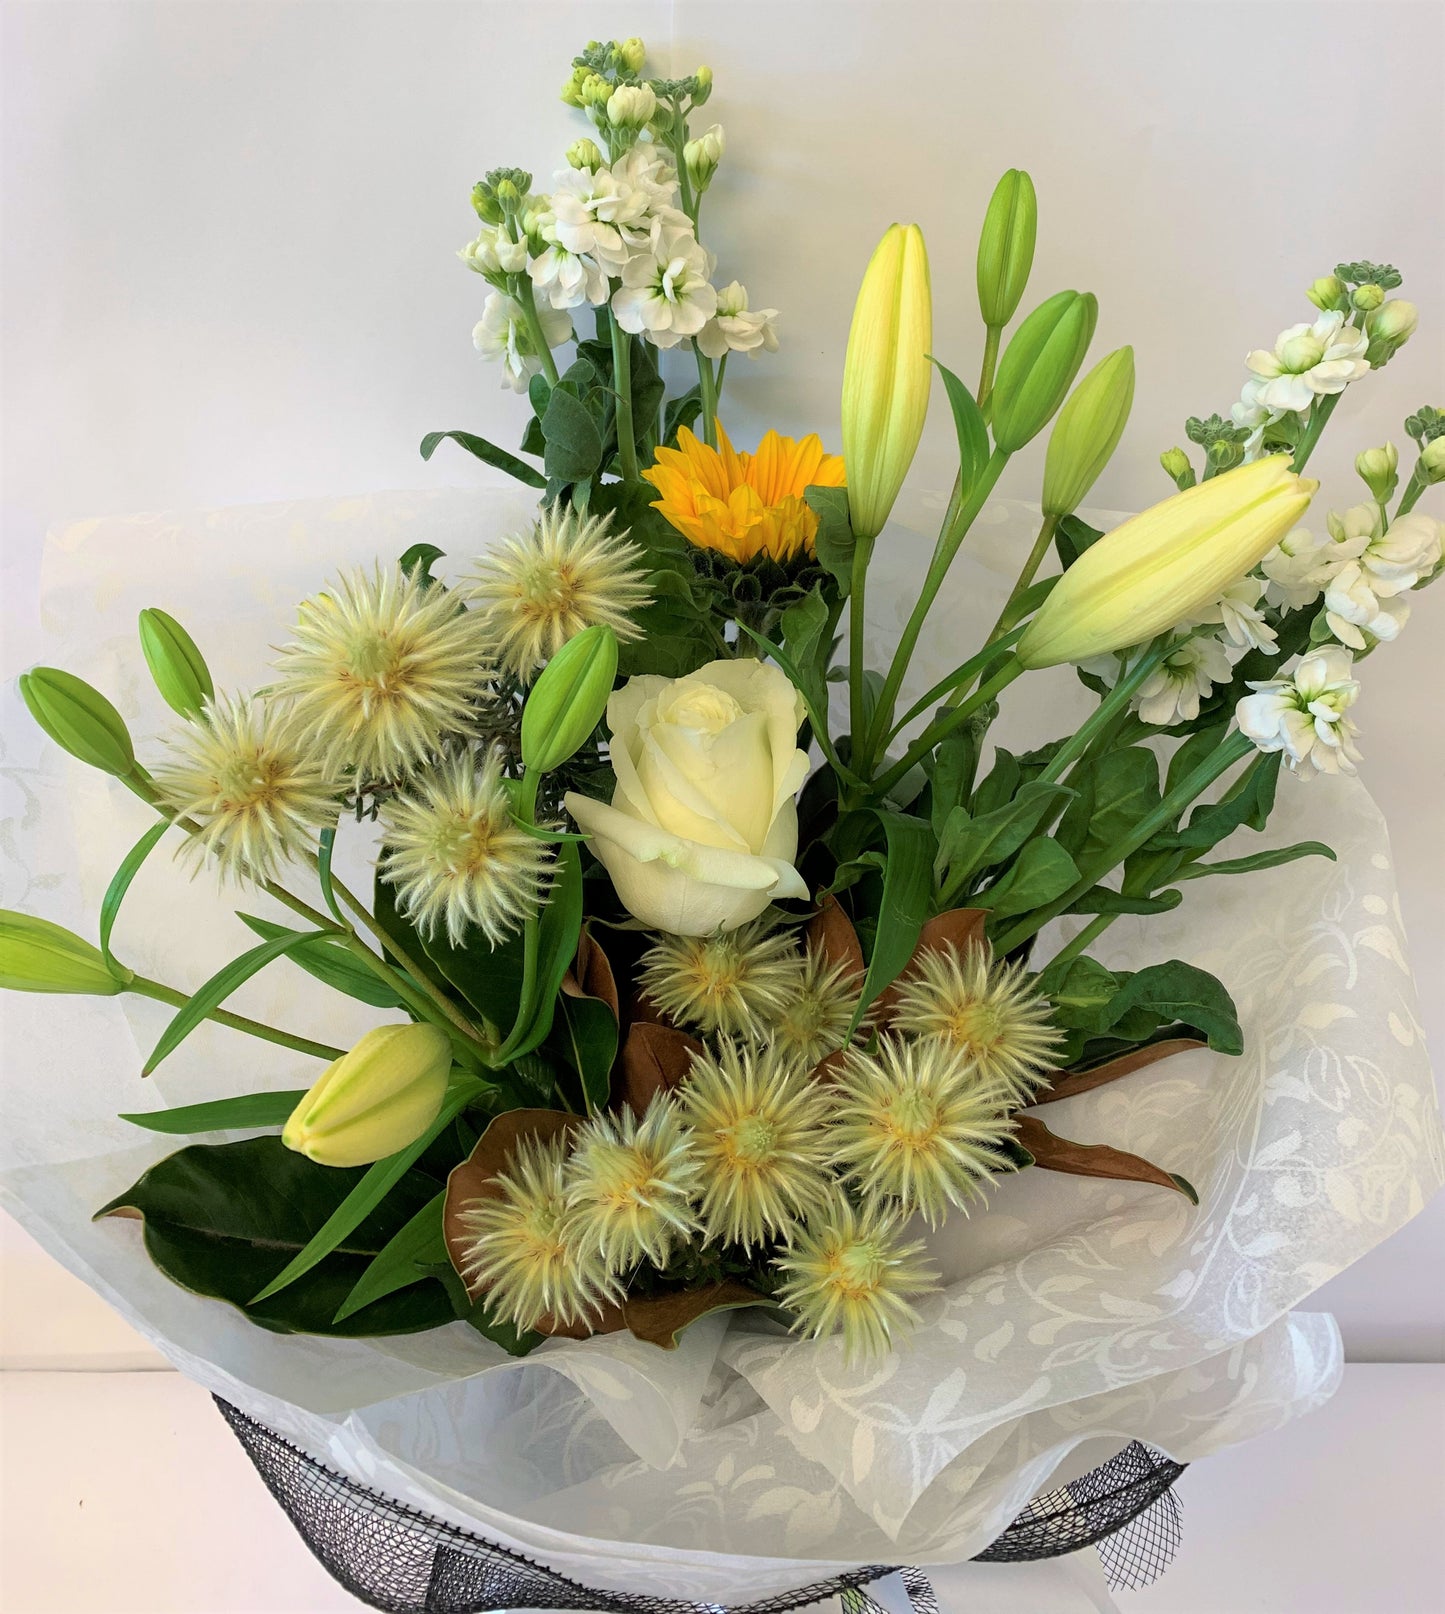 Green, white and yellow hand-tied flowers for sympathy or get well      Delivery throughout New Zealand 